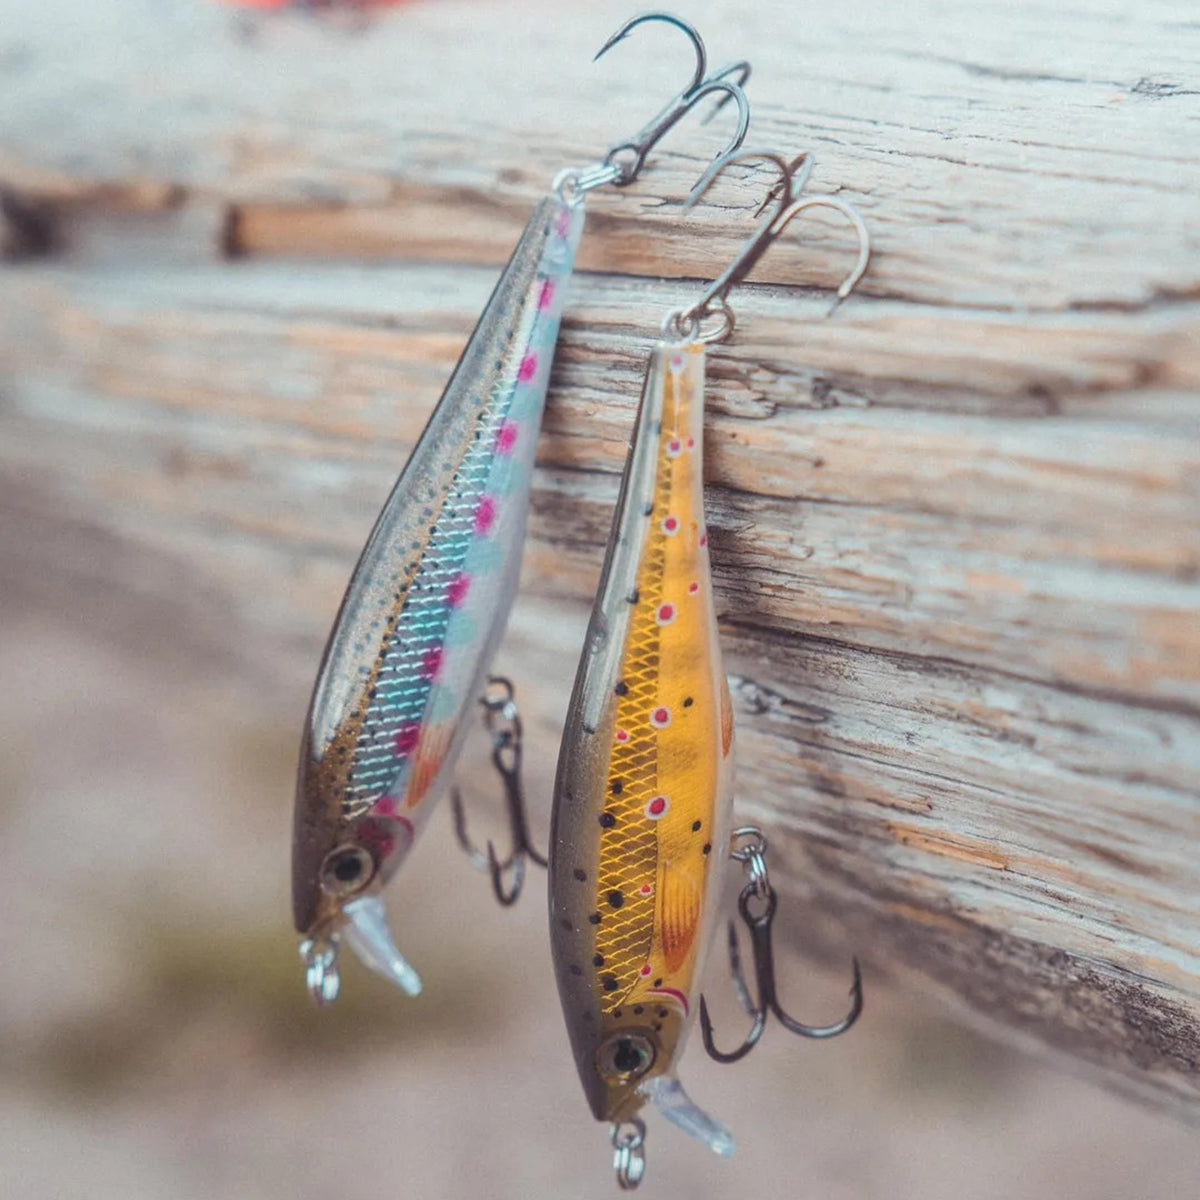 Rapala® Jointed Lure